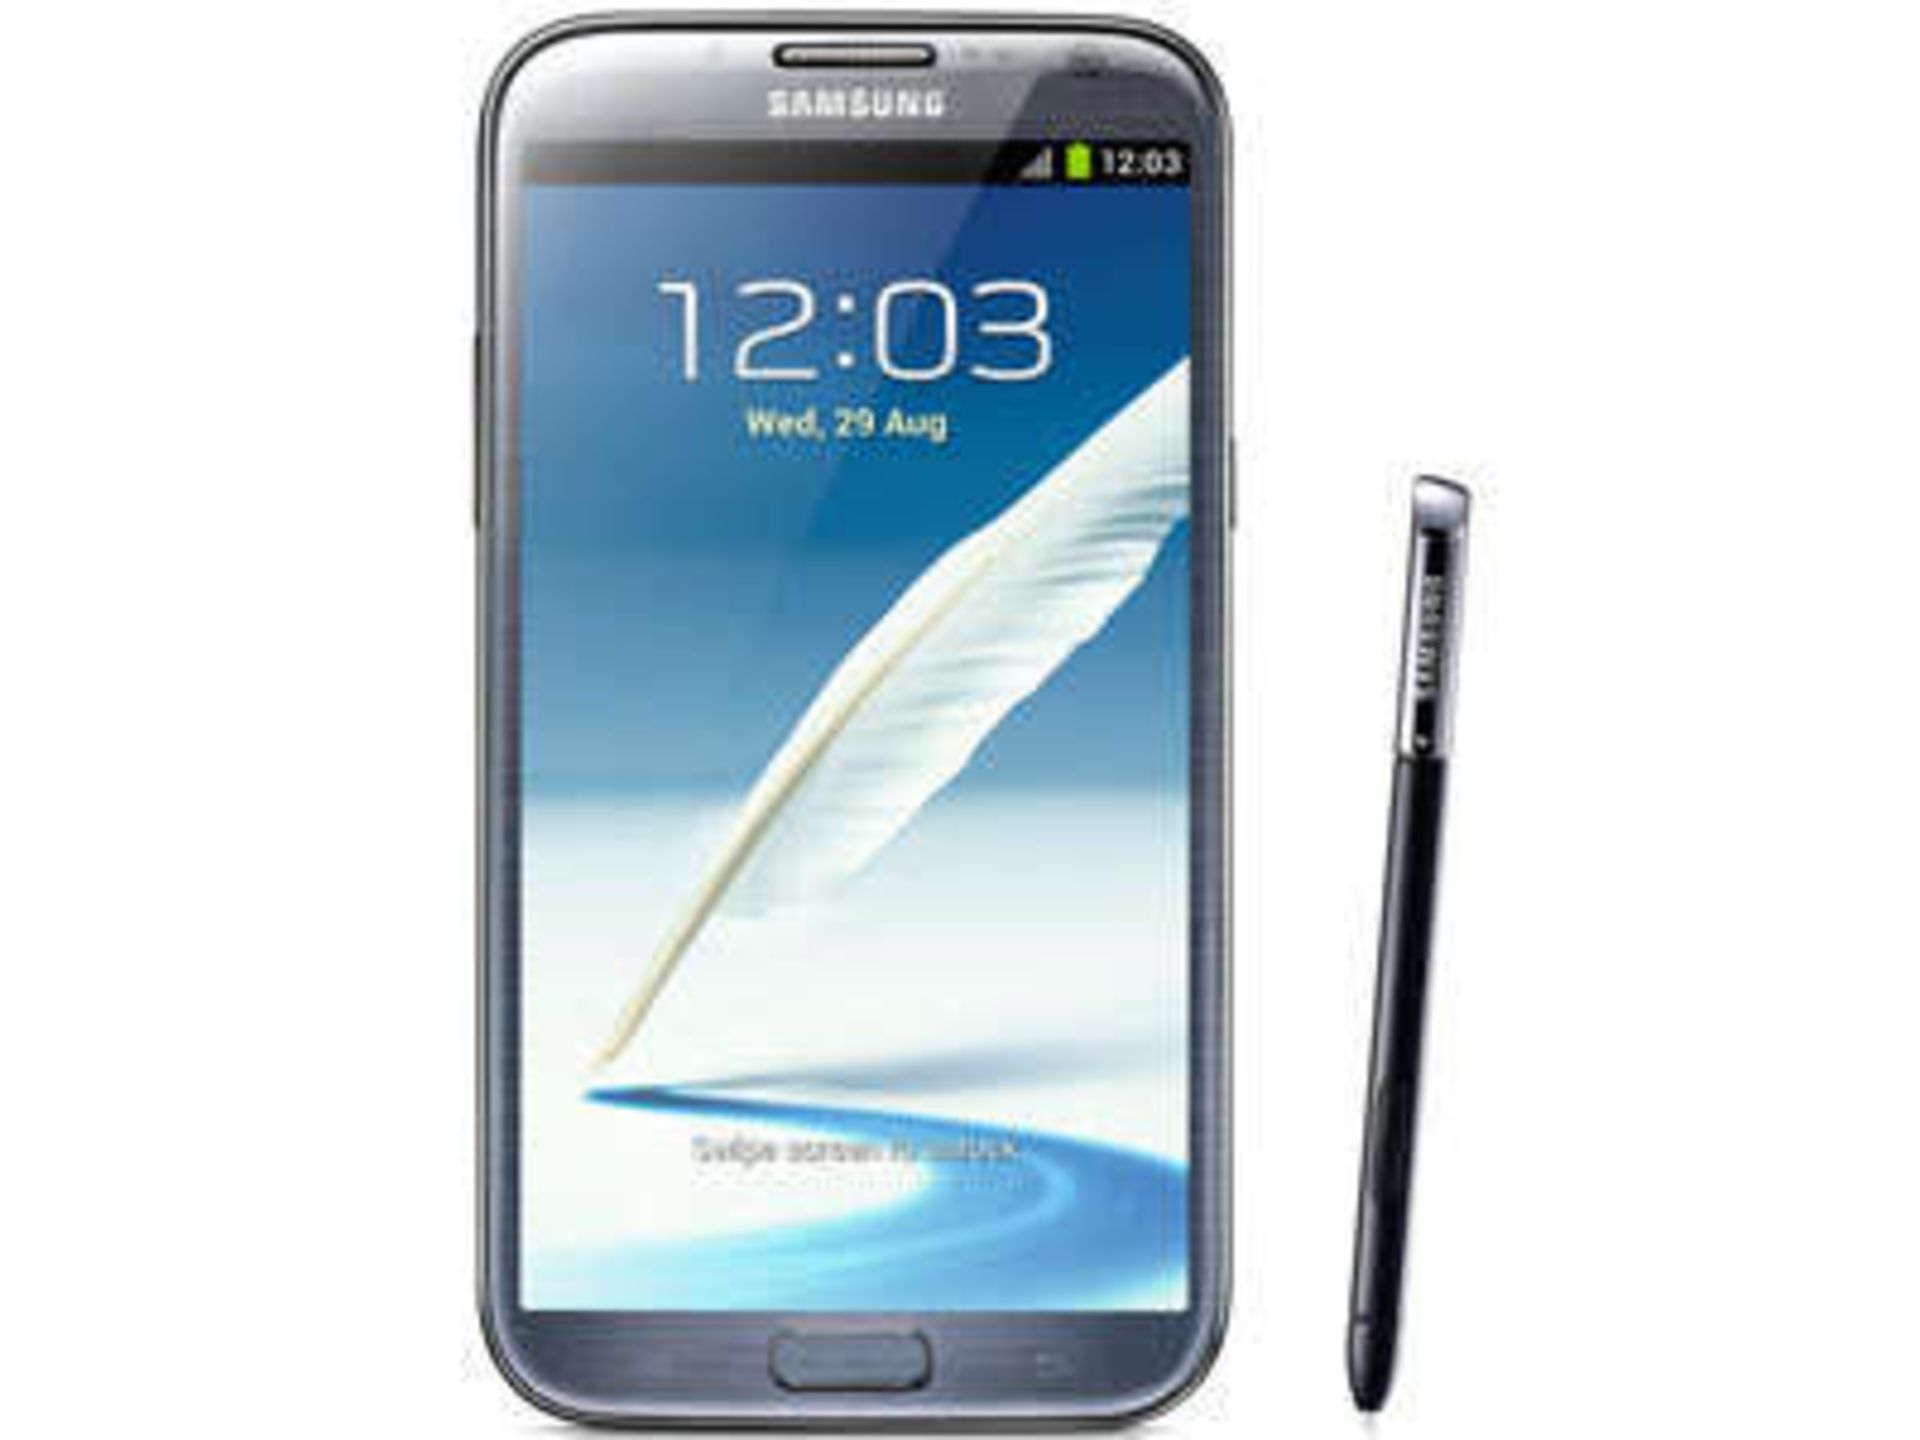 Grade A Samsung Note 2(N7100) Colours May Vary Item available from approx 27th February